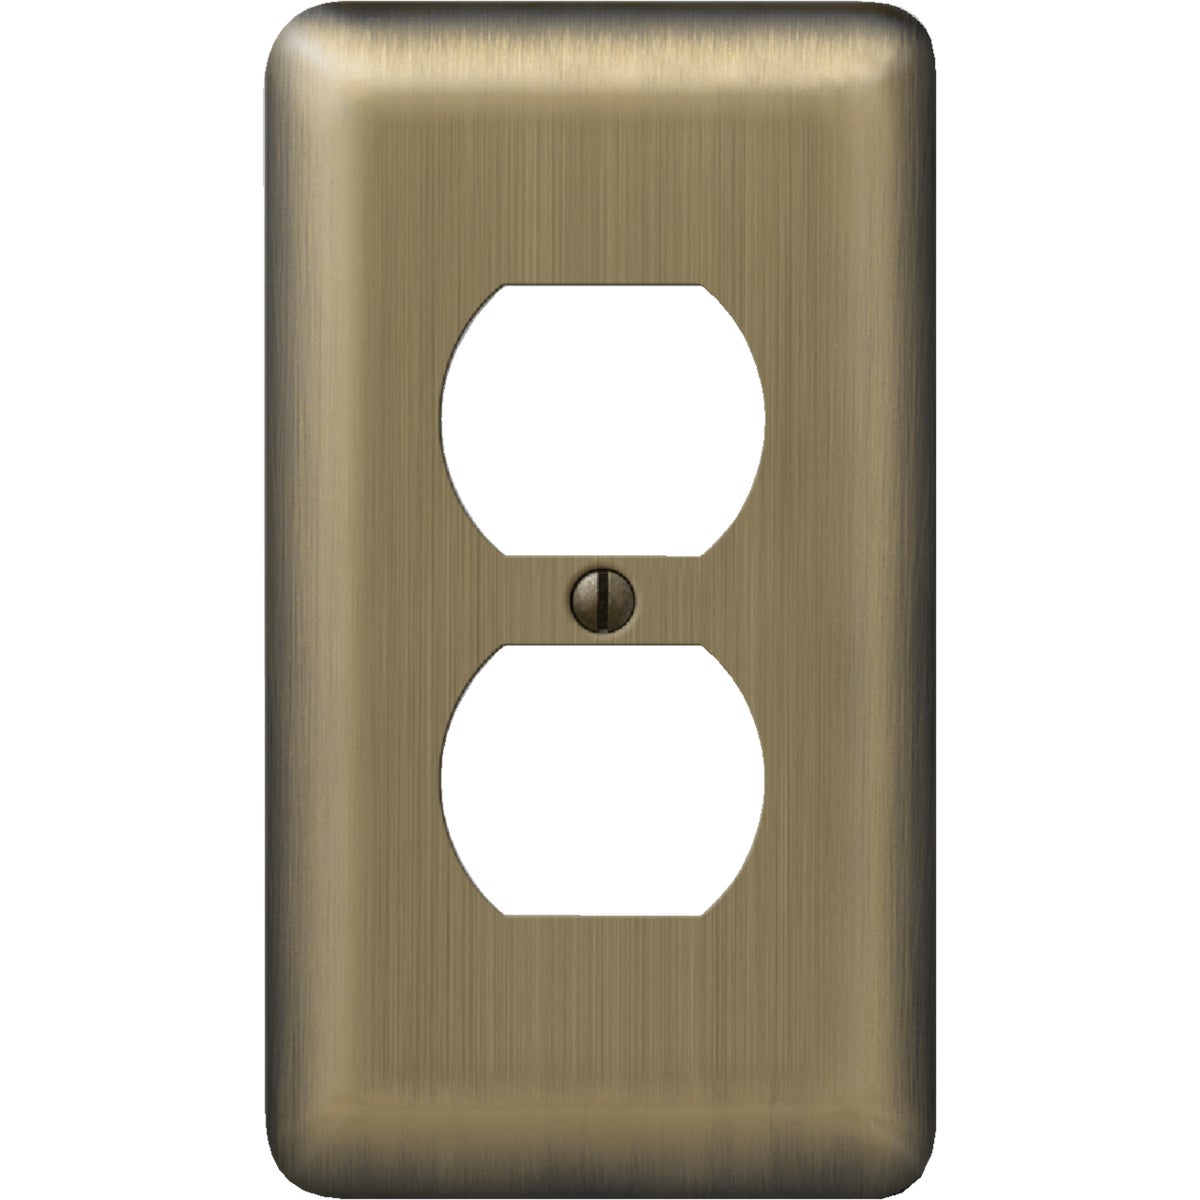 Amerelle 1-Gang Stamped Steel Outlet Wall Plate, Brushed Brass